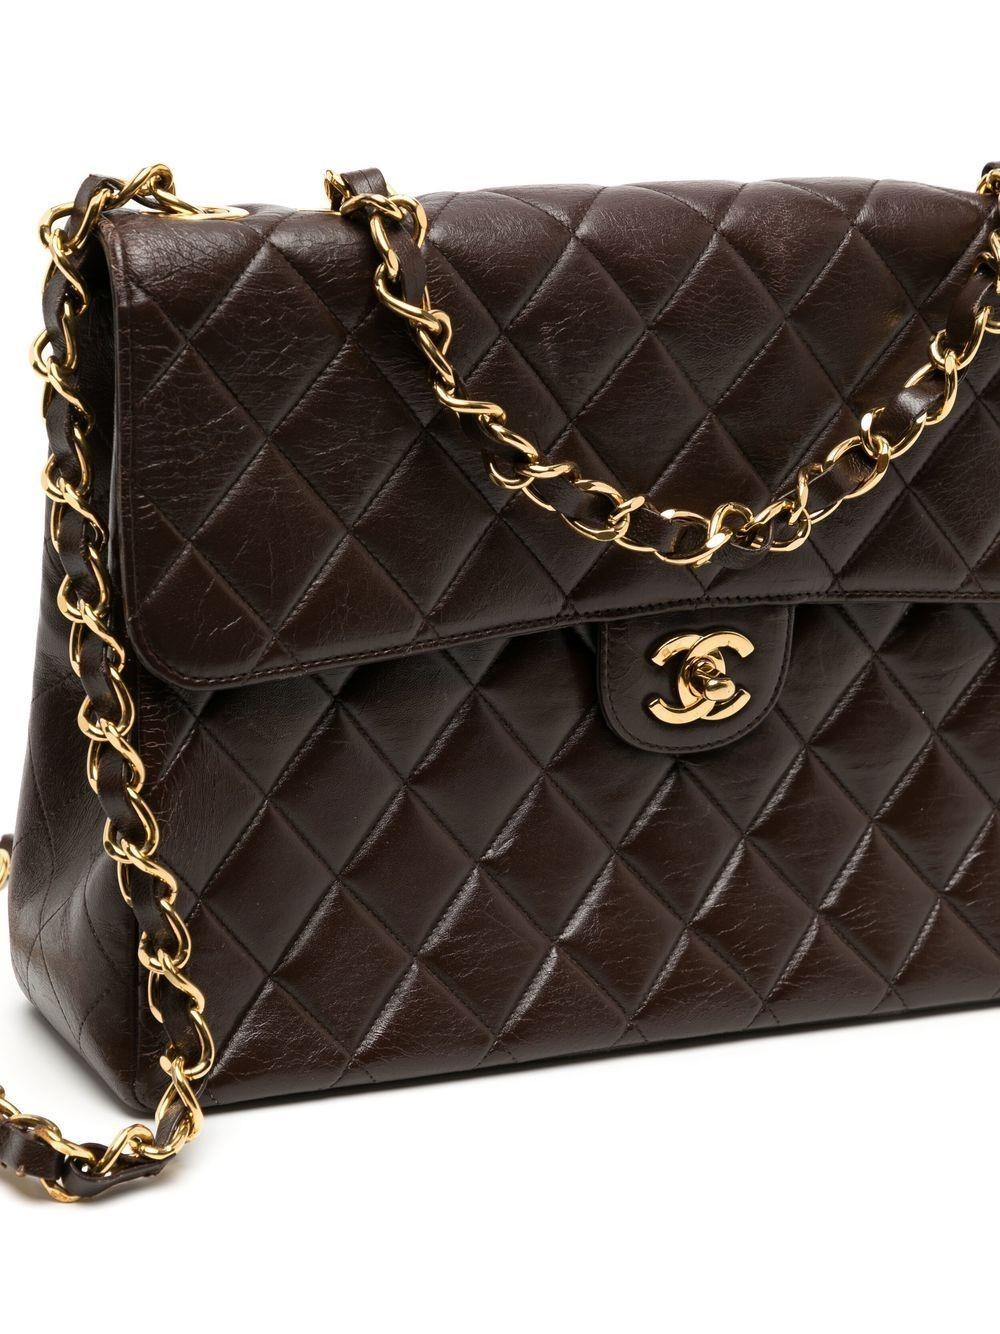 Crafted from soft lambskin leather, this Brown Quilted Lambskin Jumbo Flap from Chanel 1997-1999 features a single flap design with a white leather interior and 24k gold-plated hardware. Finished off with the signature Chanel quilting and 'CC'